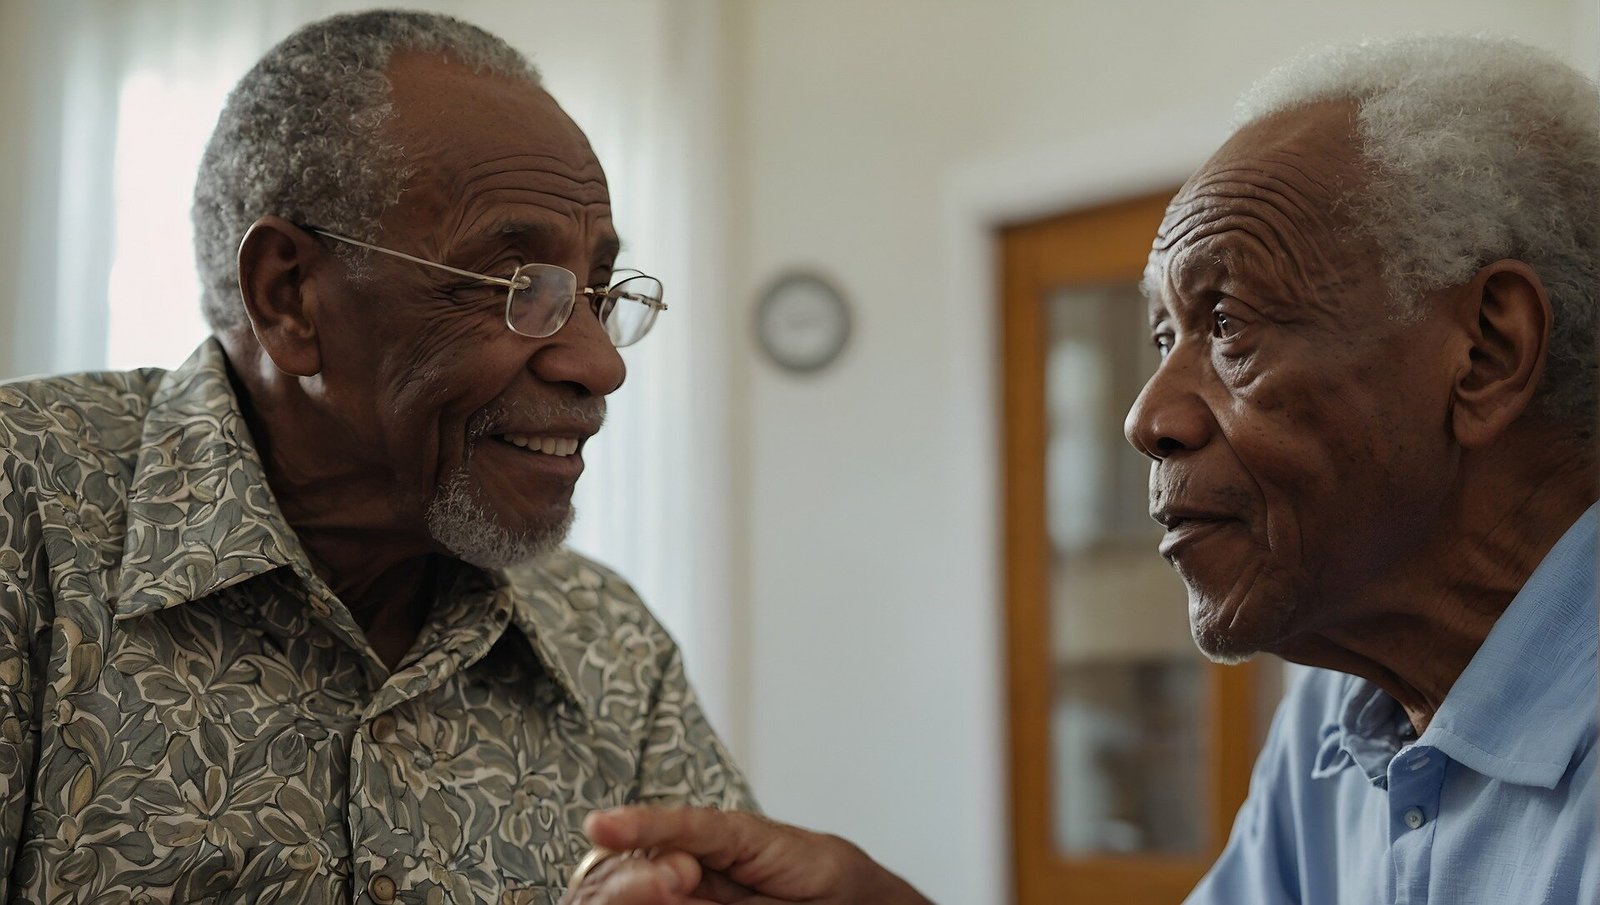 Study reveals racial disparities in diagnosis and drug use for dementia symptoms